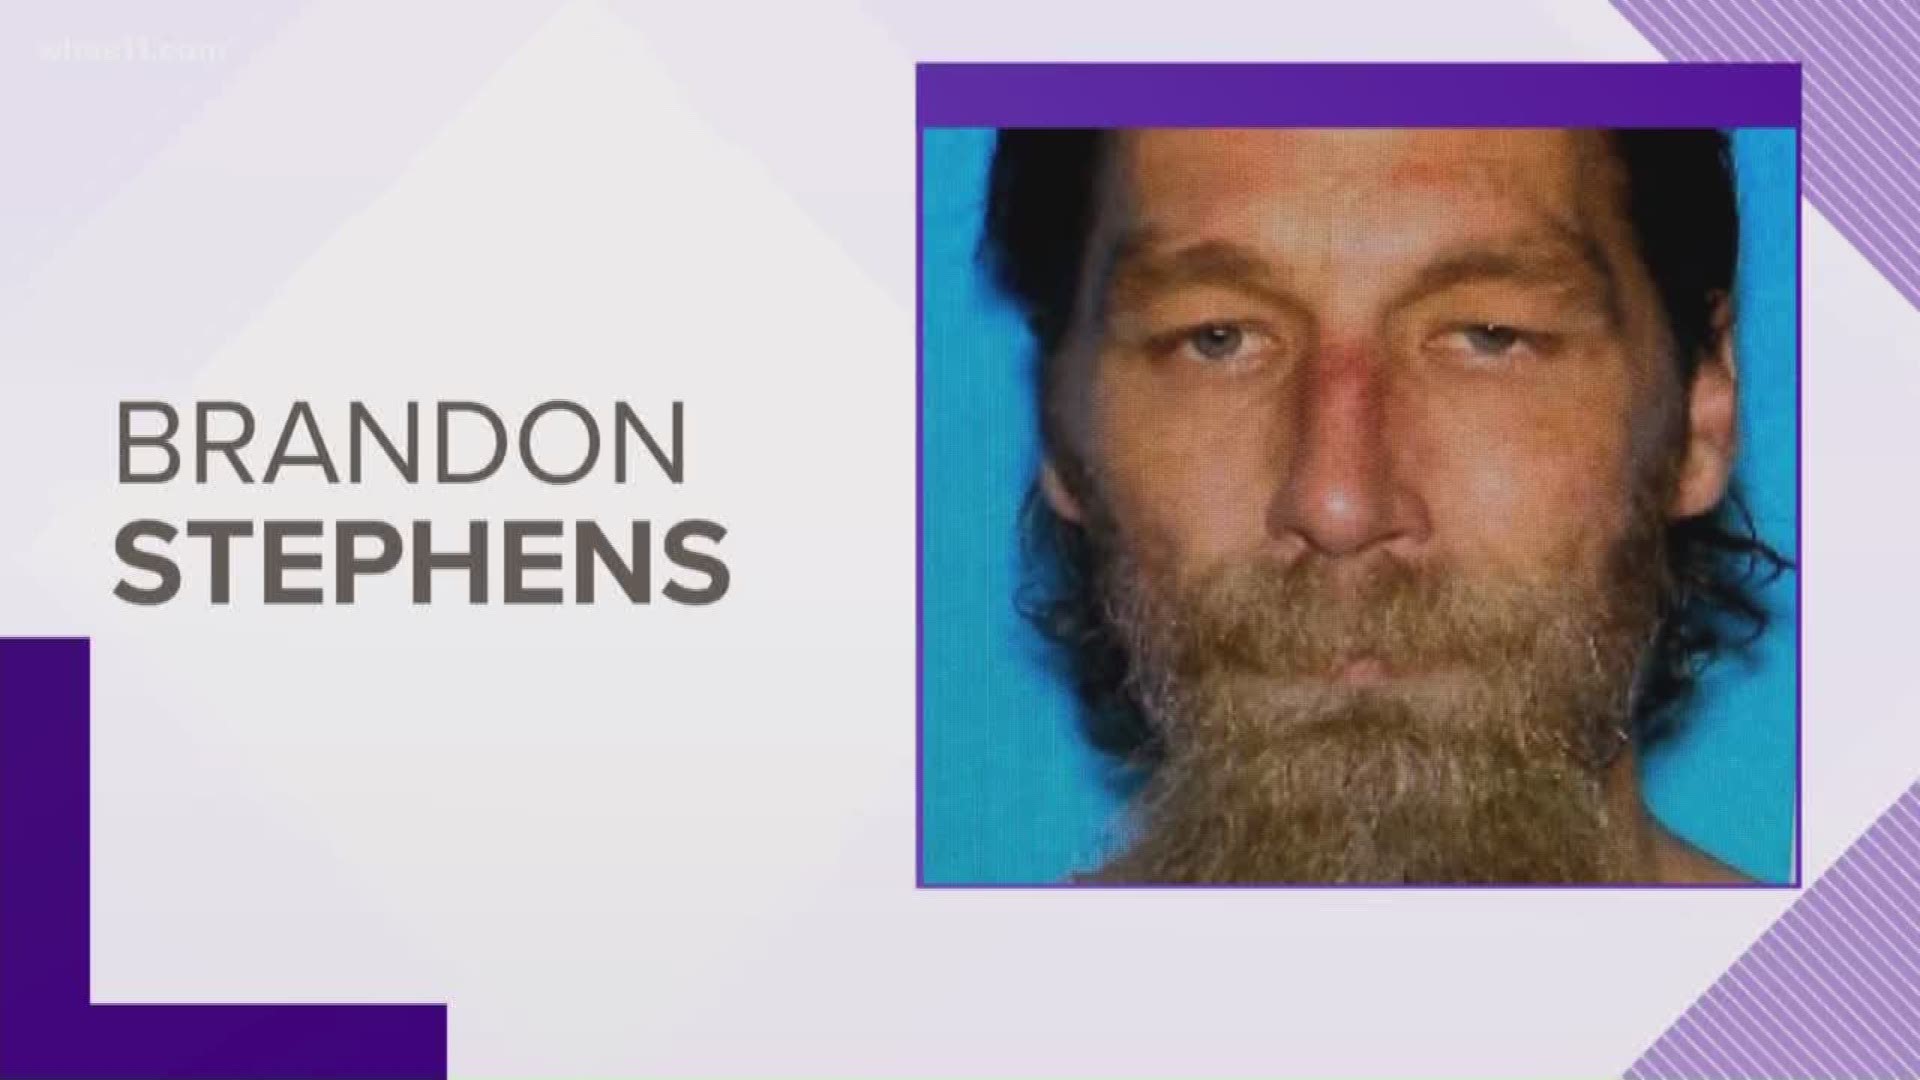 Brandon Stephens shot at a woman Thursday morning, barely missing her. Police are searching for him and believe he is armed and dangerous.